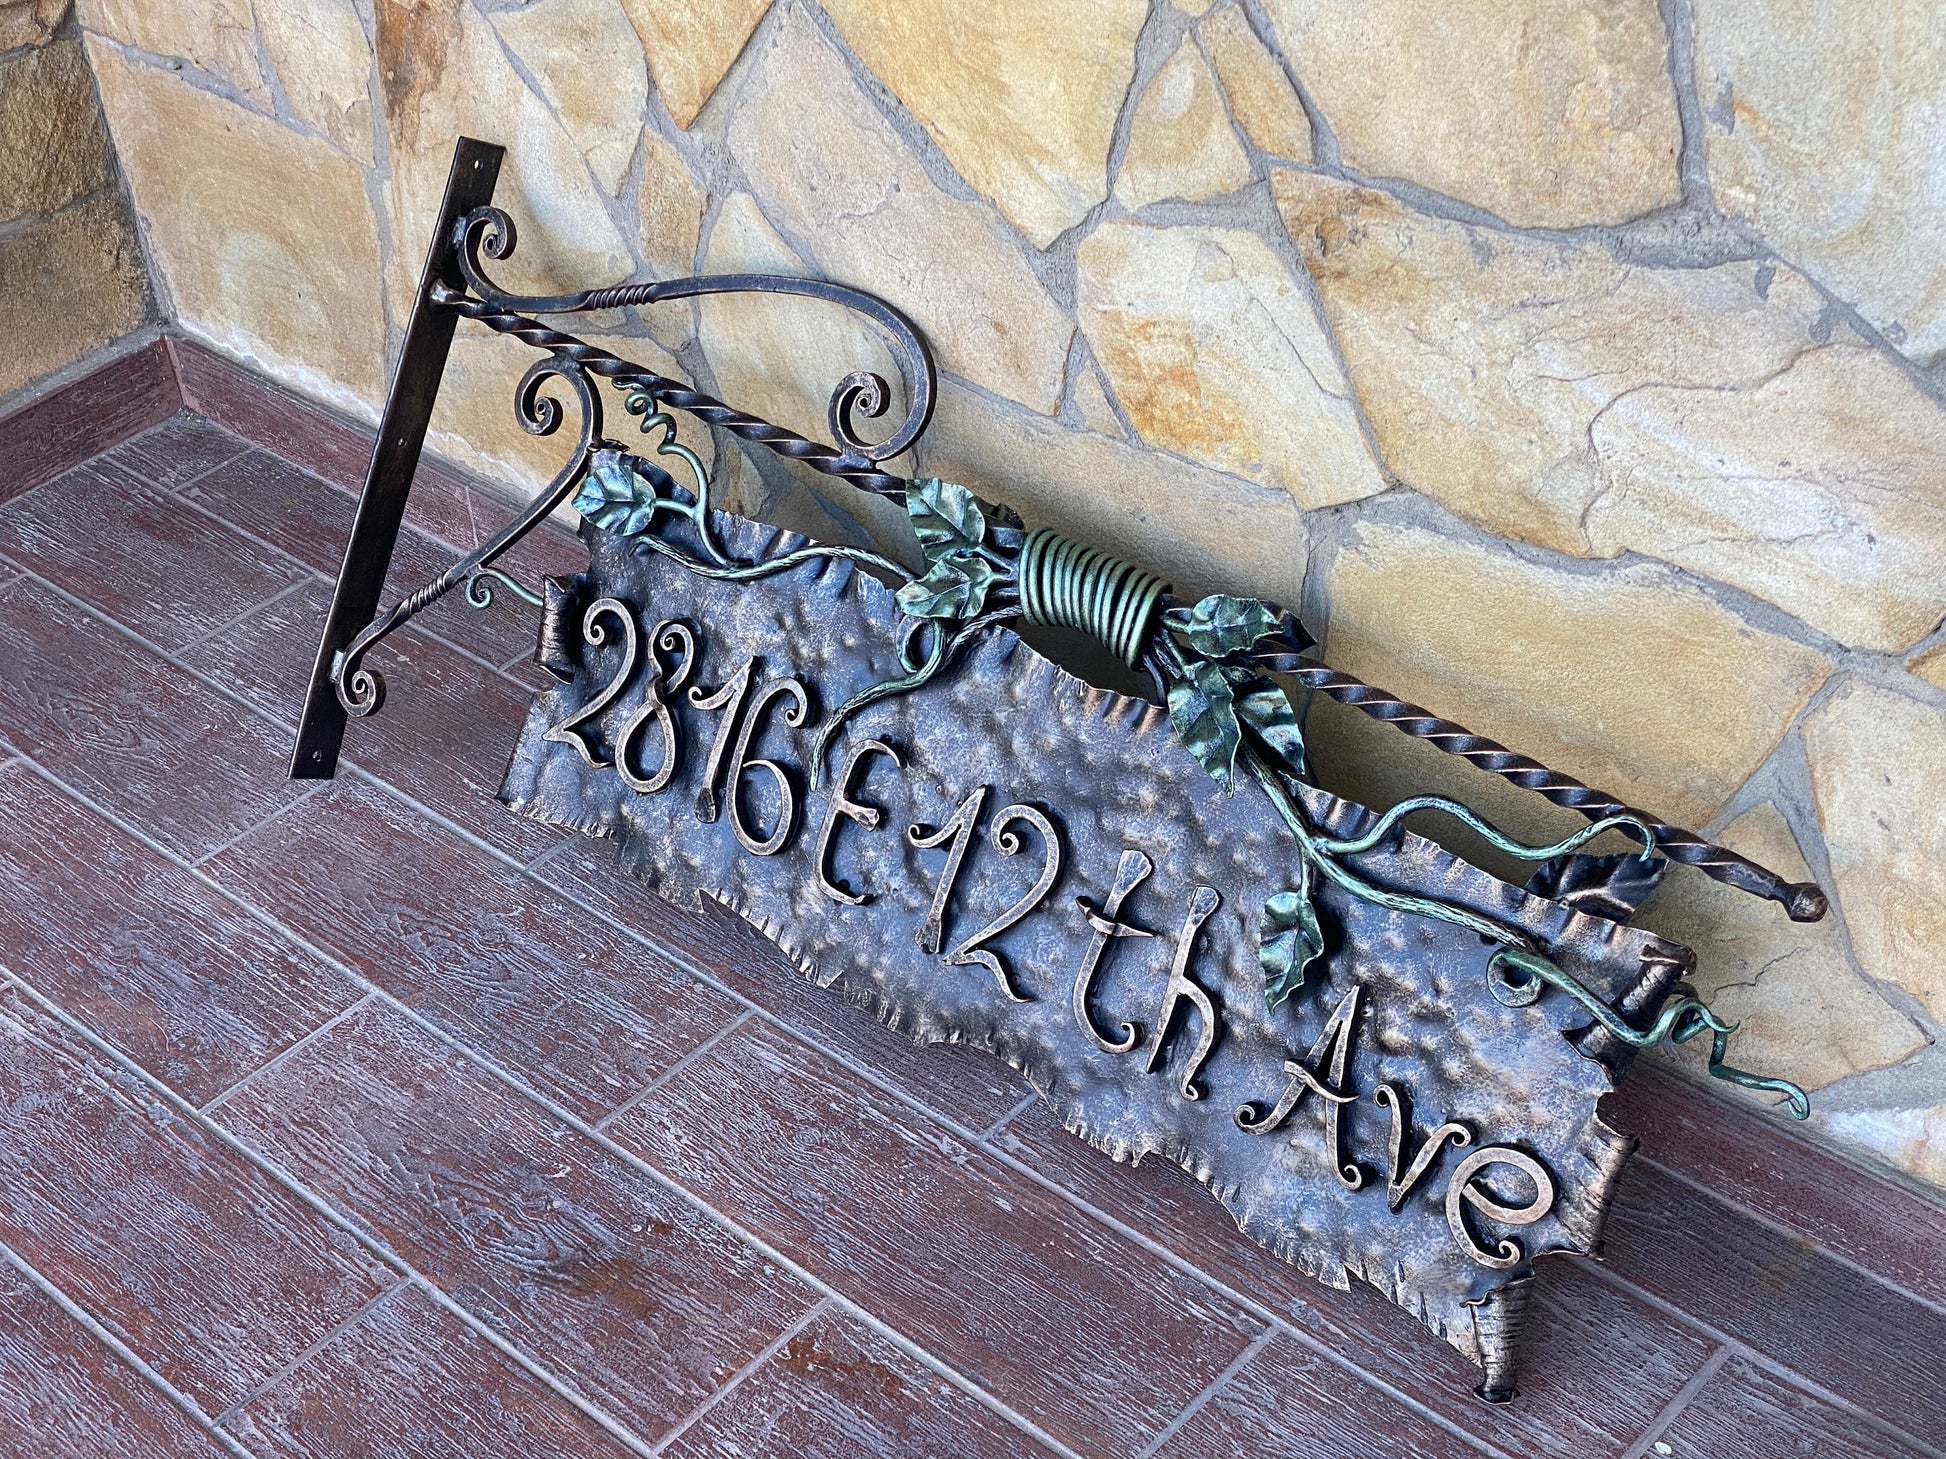 Plaque, sign, personalized plaque, house number plaque, house number sign,mailbox,Christmas,birthday,iron gift,6th anniversary,street plaque